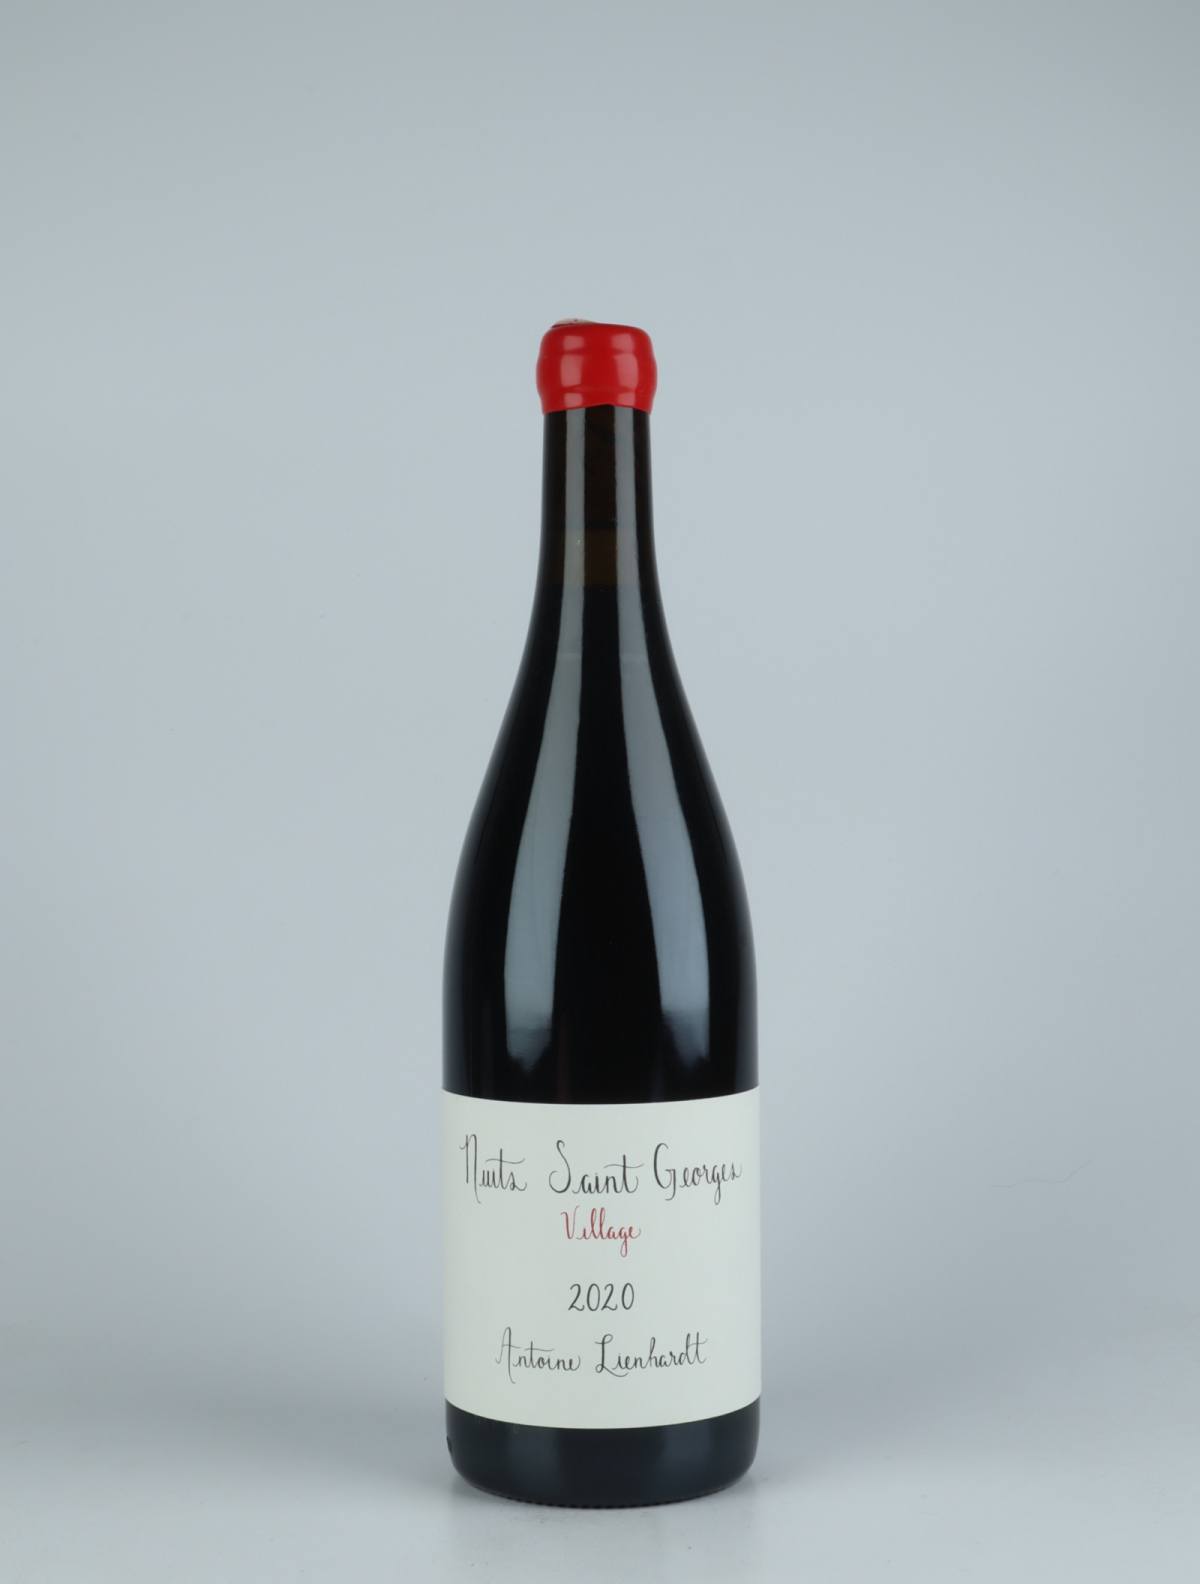 A bottle 2020 Nuits Saint Georges Red wine from Antoine Lienhardt, Burgundy in France